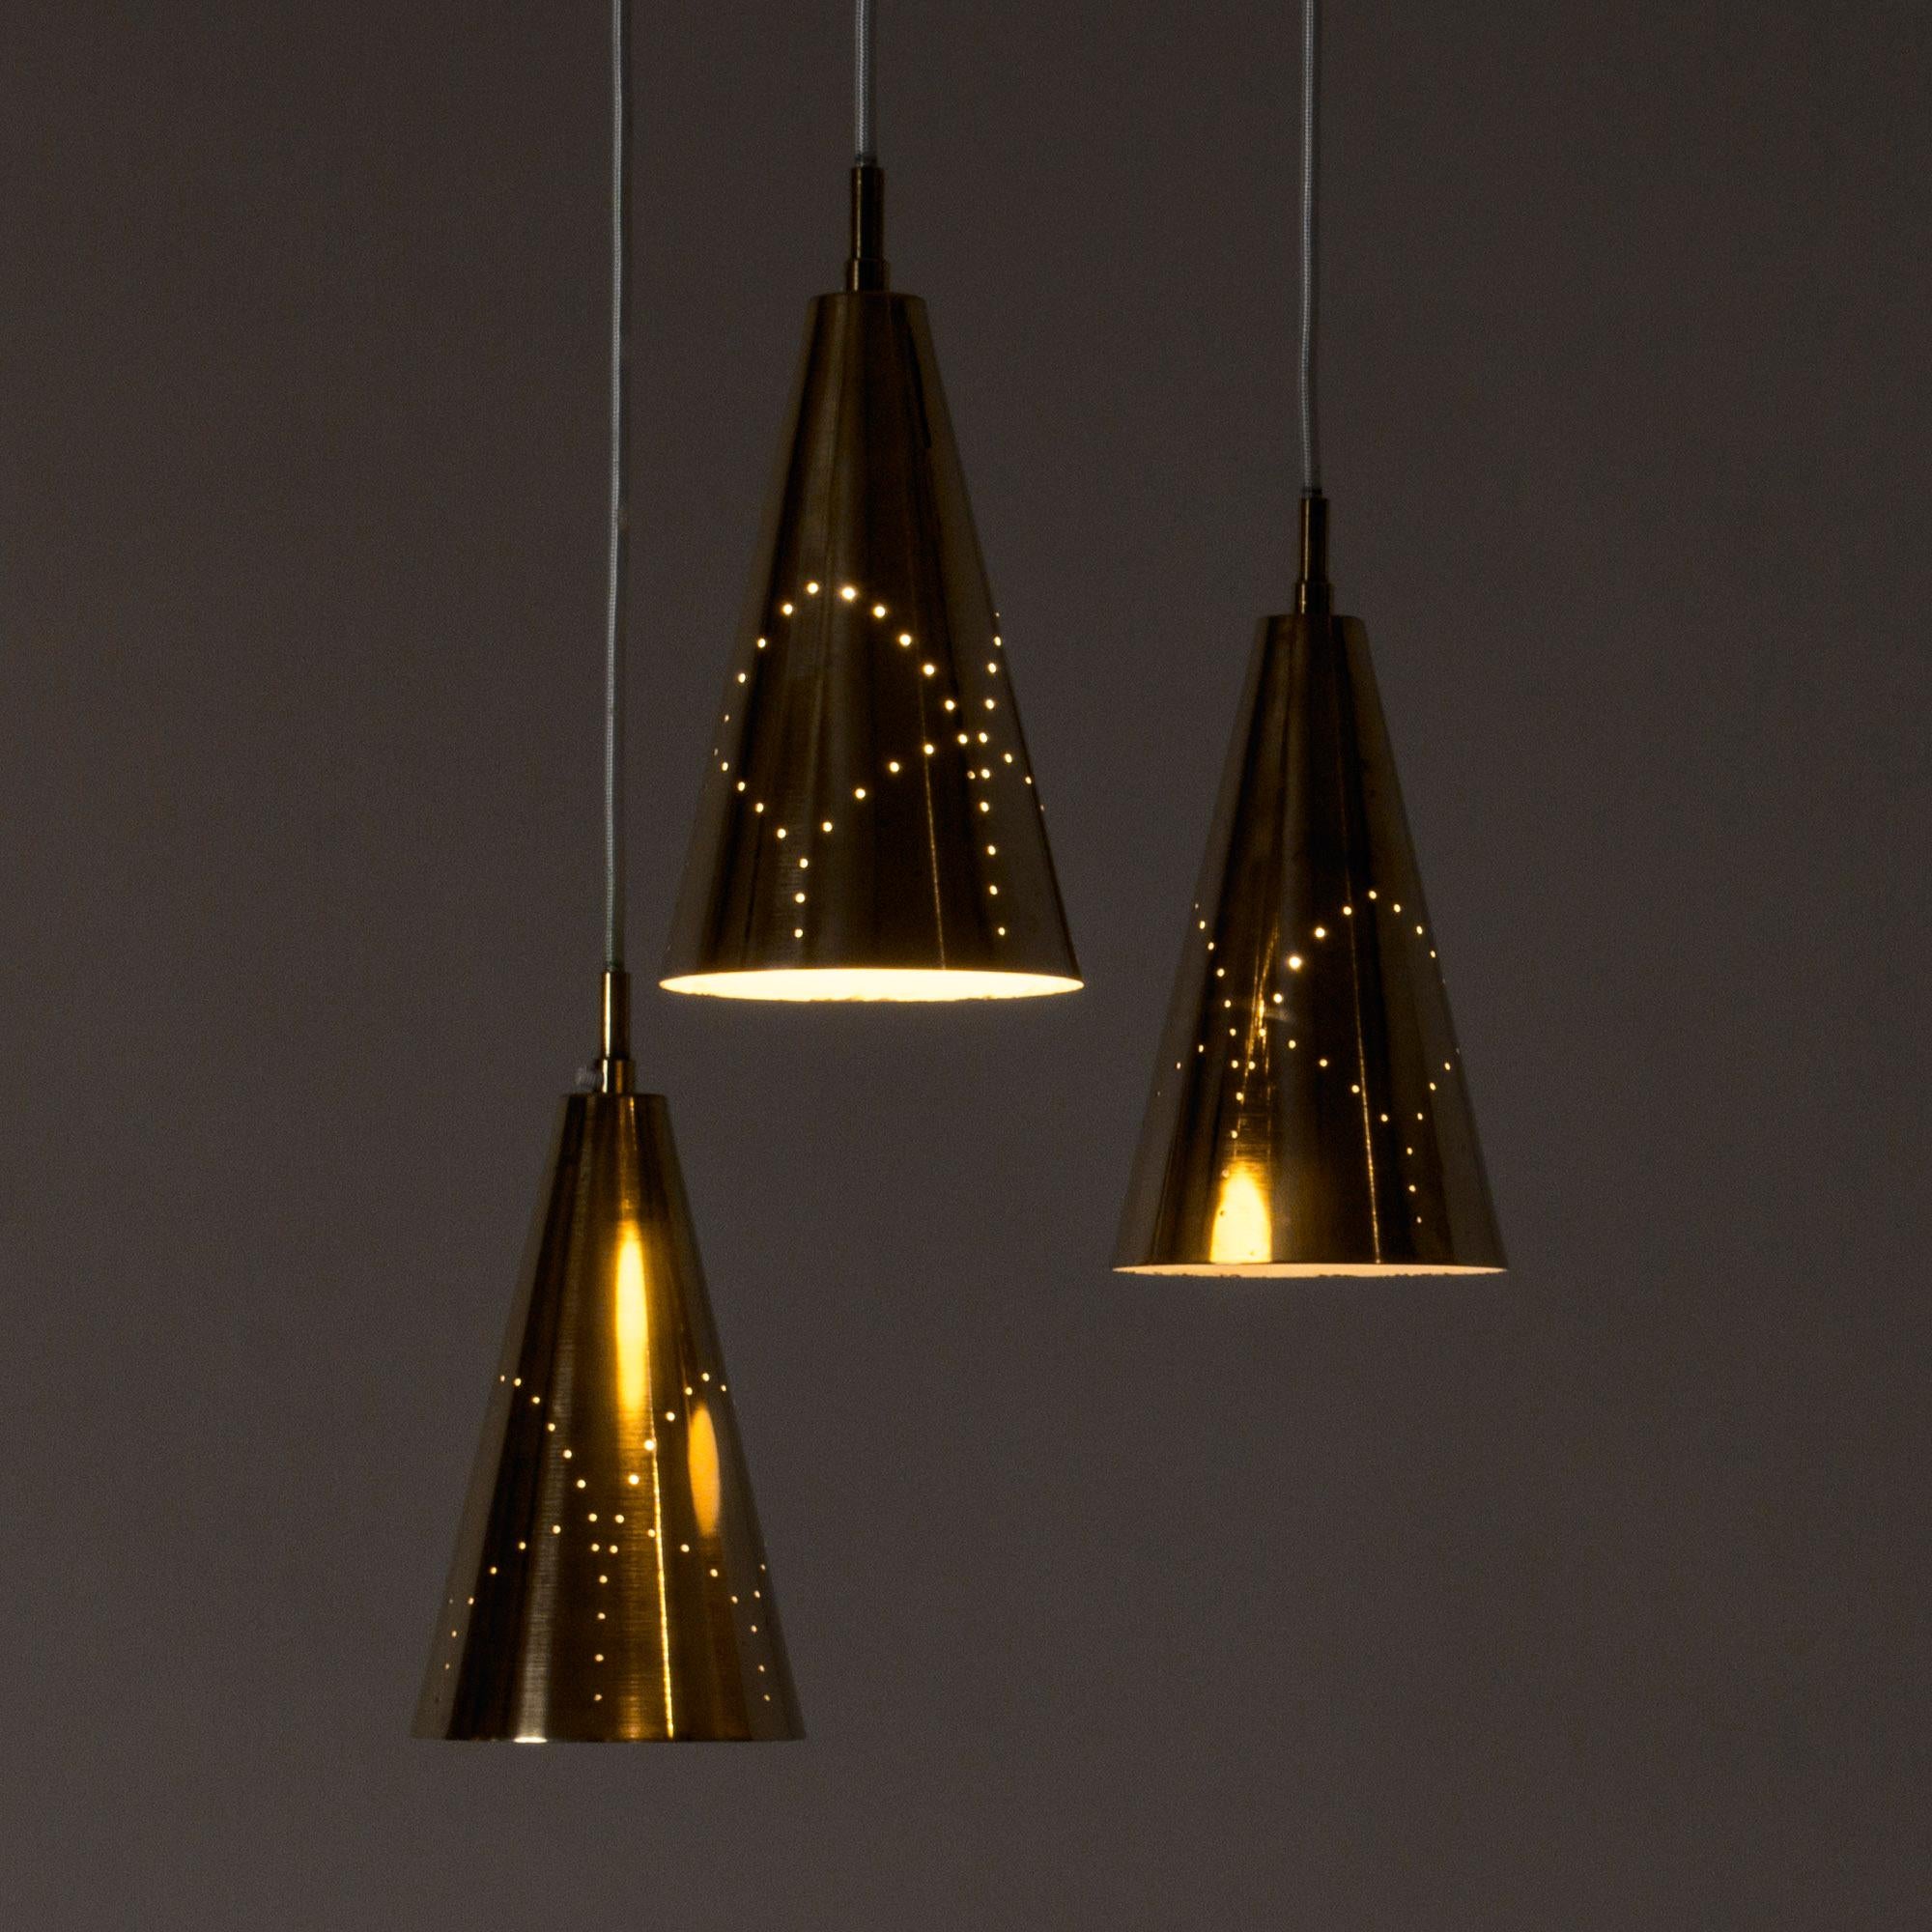 Rare, early ceiling lamp by Hans-Agne Jakobsson. The three brass lampshades are perforated with a pattern that looks especially beautiful when lit. The textile cords are joined by a three-armed brass divided with a brass ball in the center.